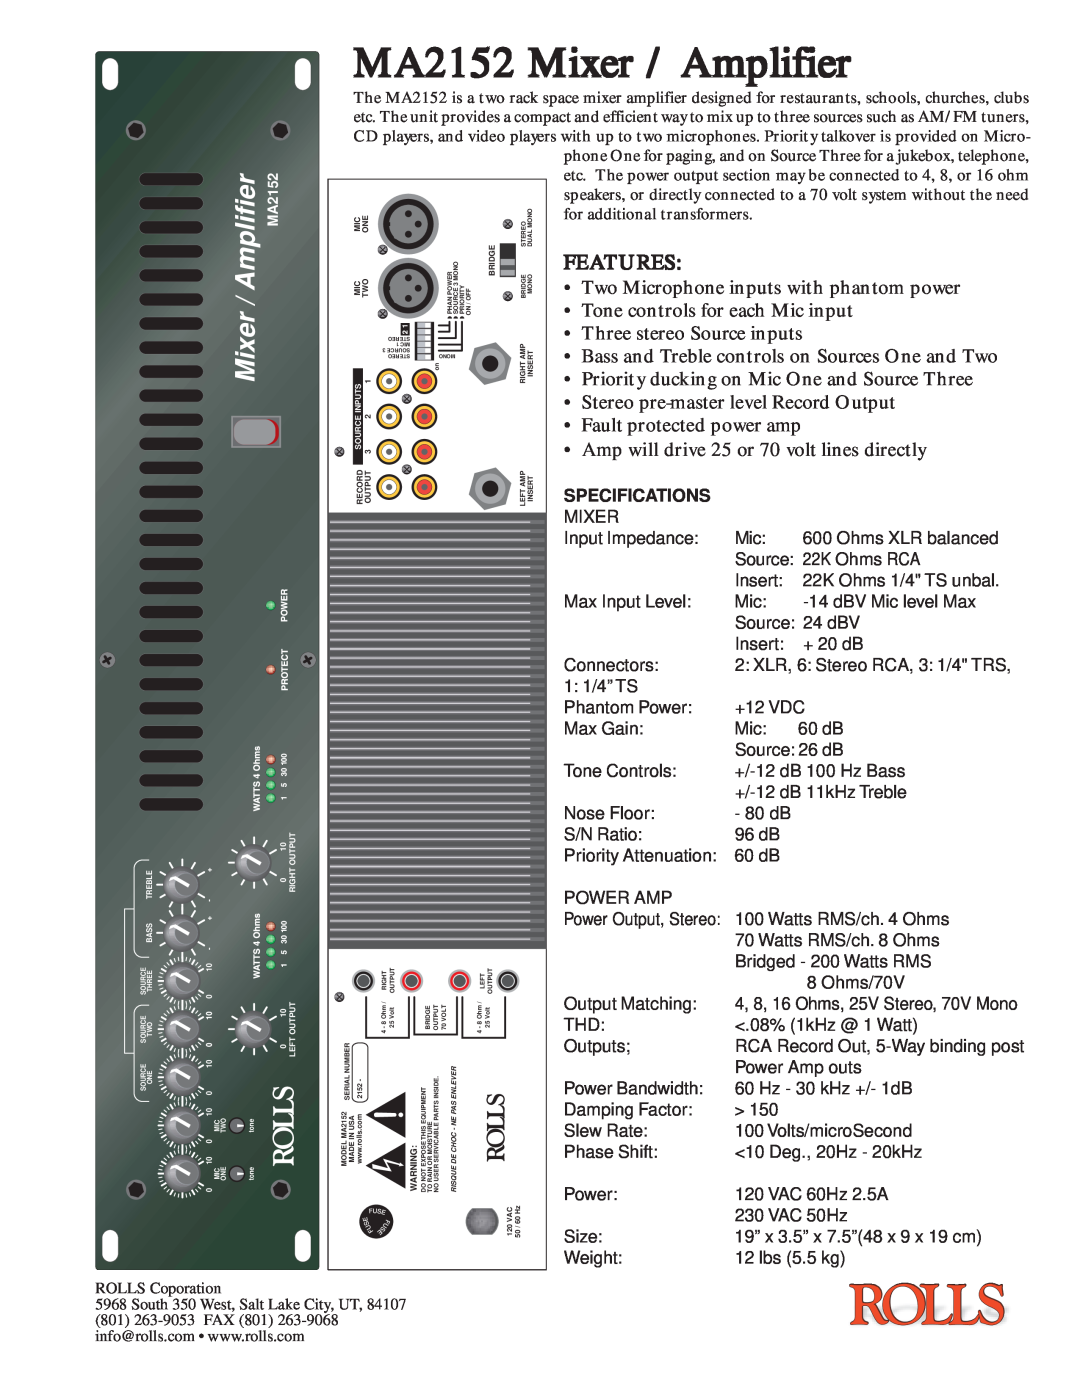 Rolls AMA2152 specifications MA2152 Mixer / Amplifier, Features, Tone controls for each Mic input, Specifications 